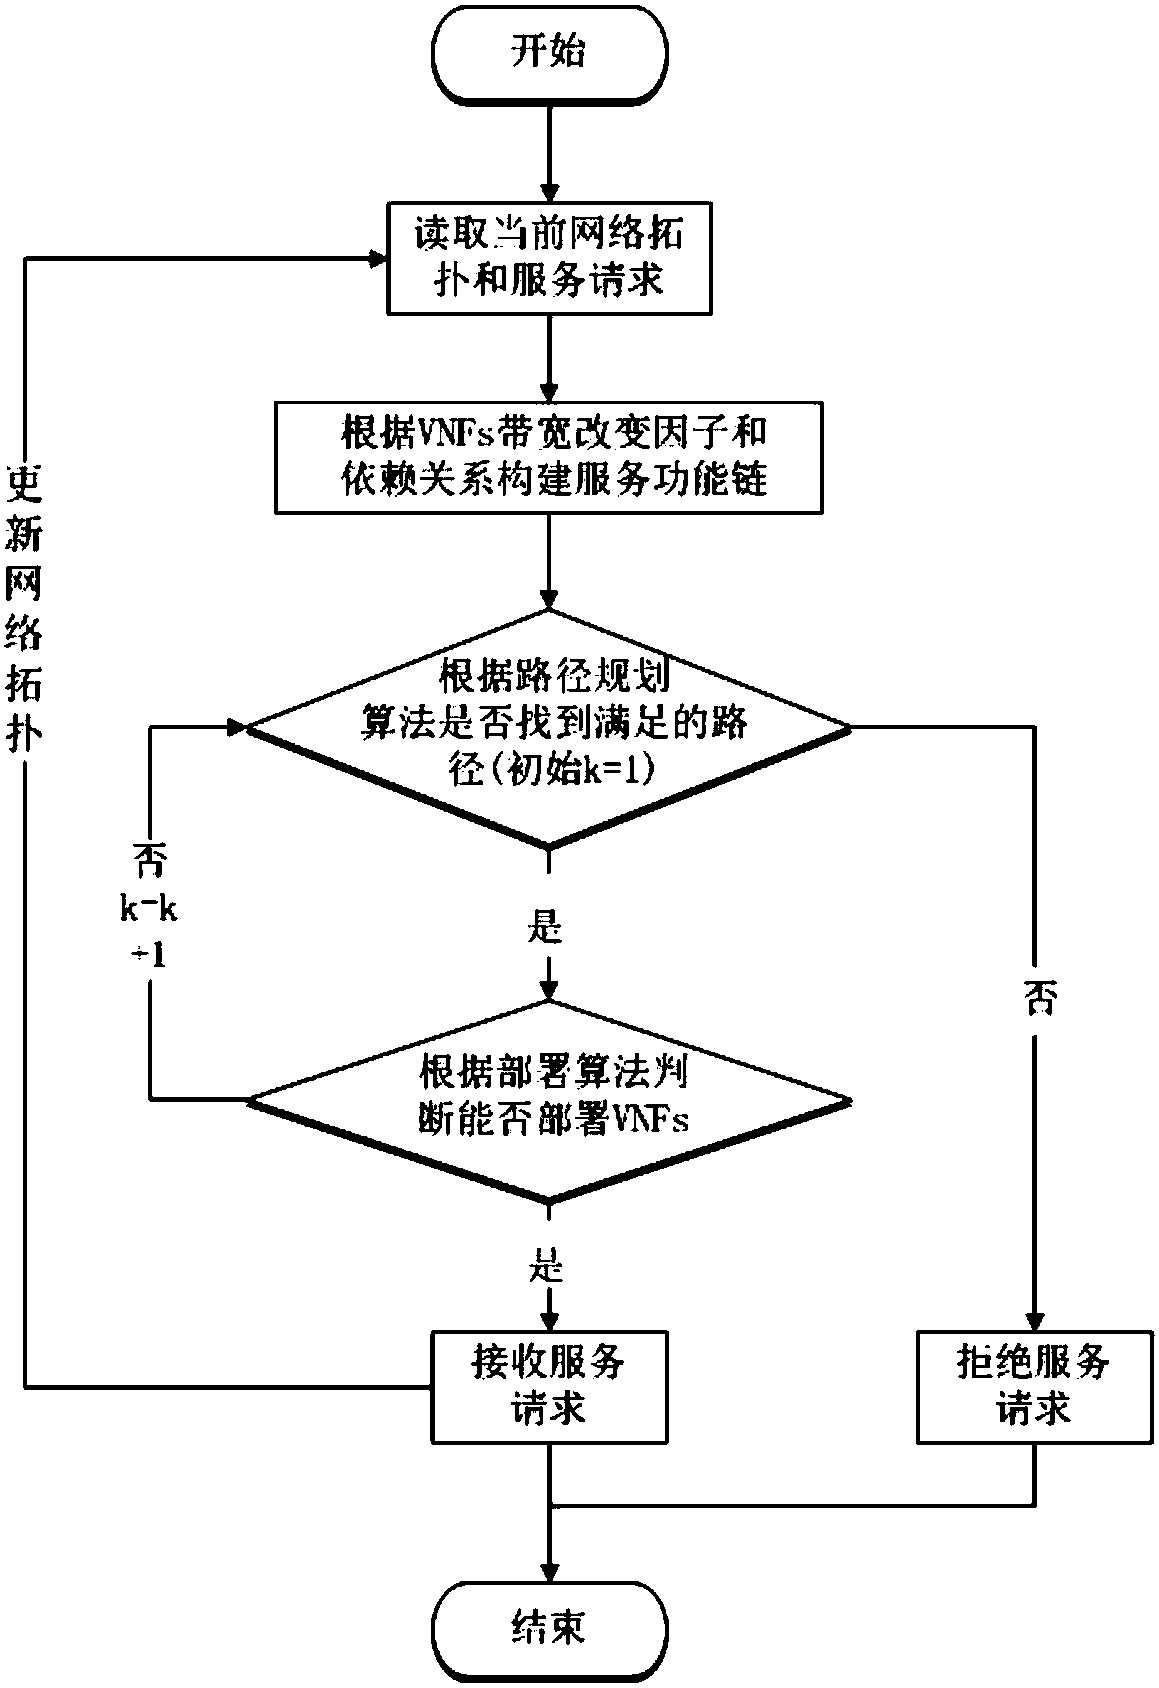 Network service function chain mapping method